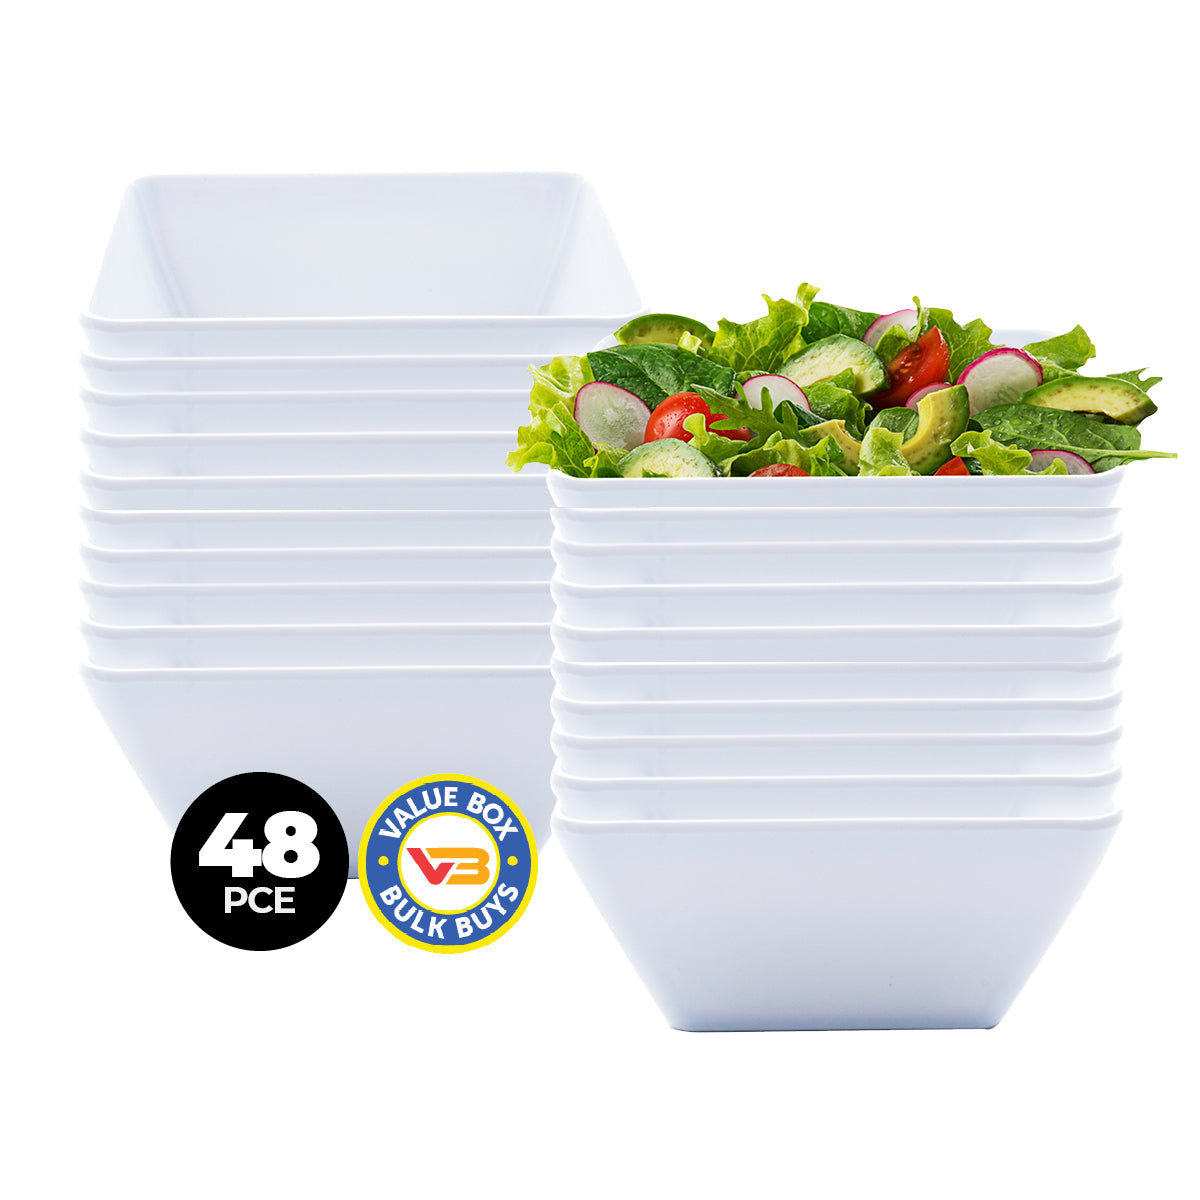 Home Master 48PCE Melamine Bowls Square Lightweight Durable Strong 20cm